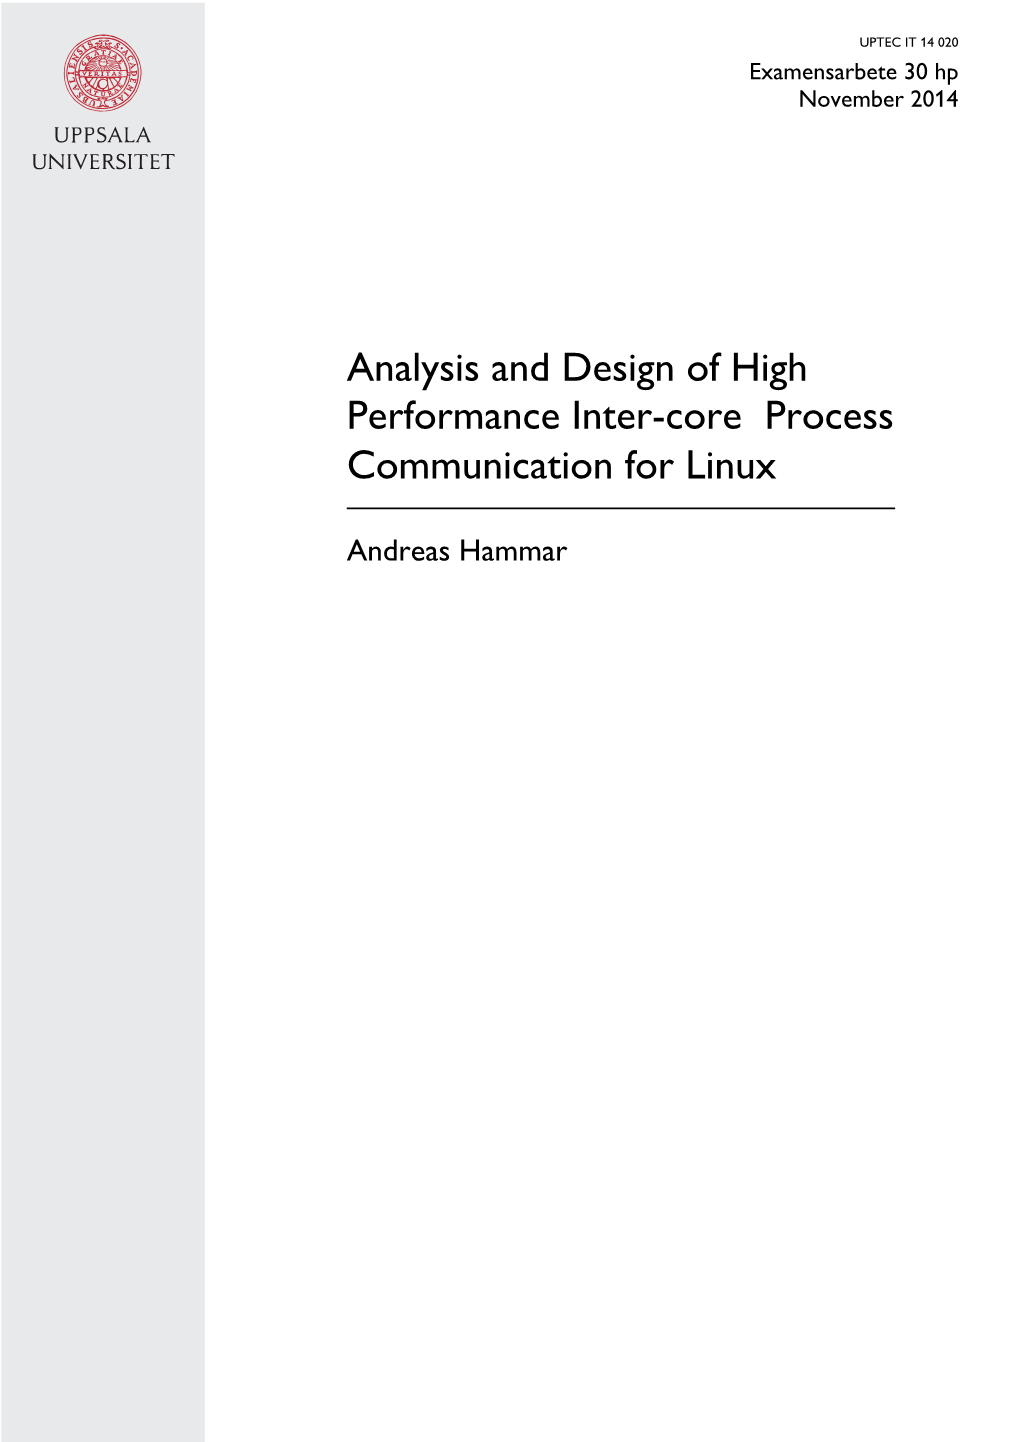 Analysis and Design of High Performance Inter-Core Process Communication for Linux